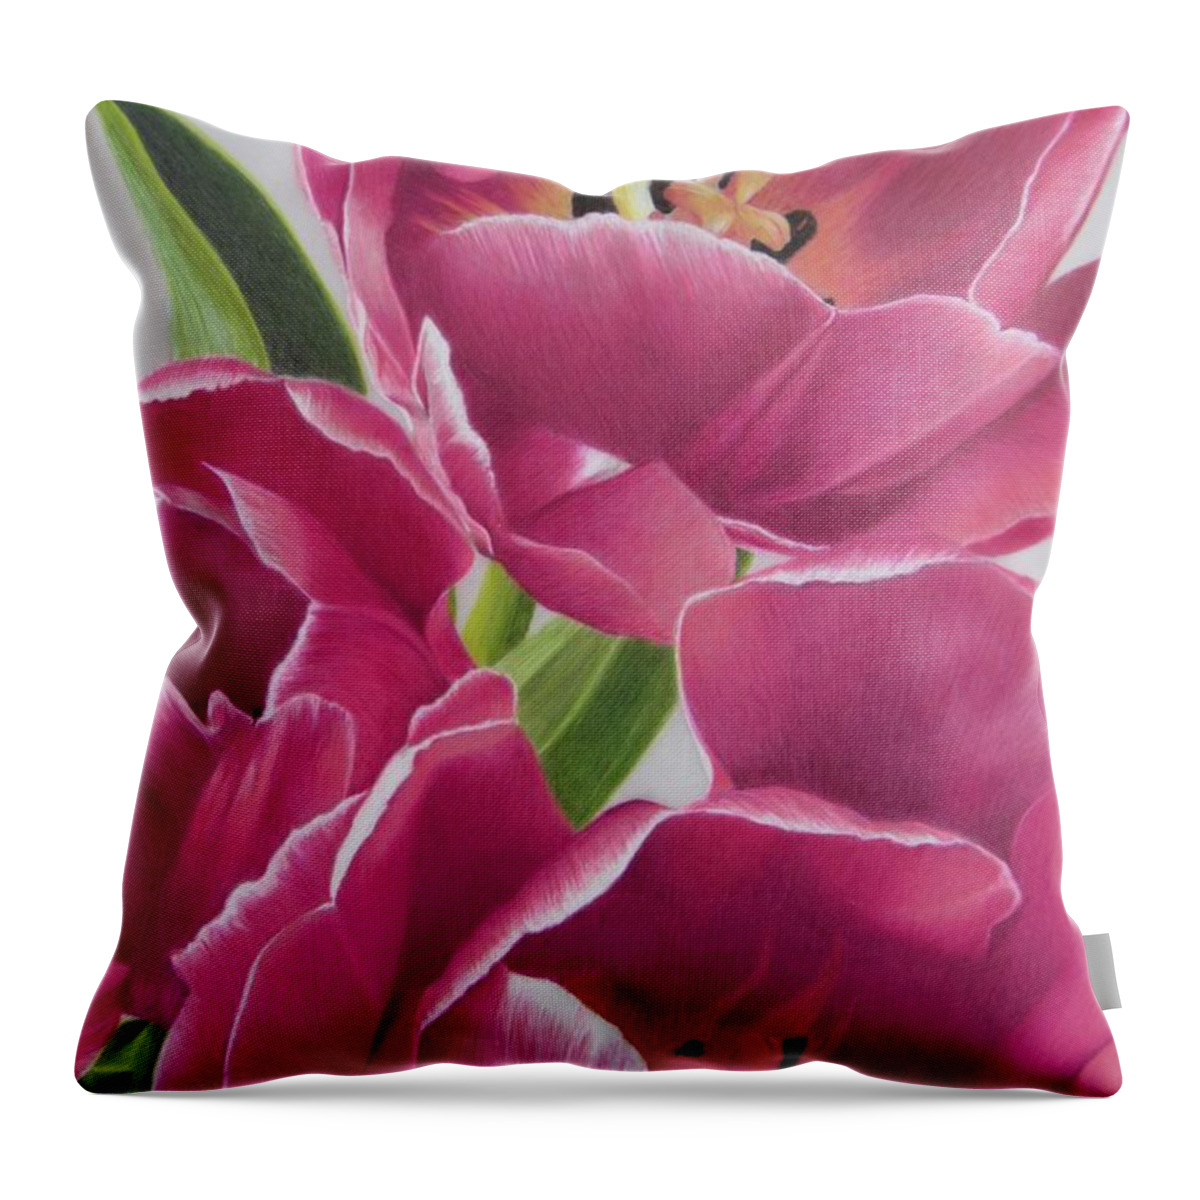 Tulips Throw Pillow featuring the drawing Pink Petals by Kelly Speros